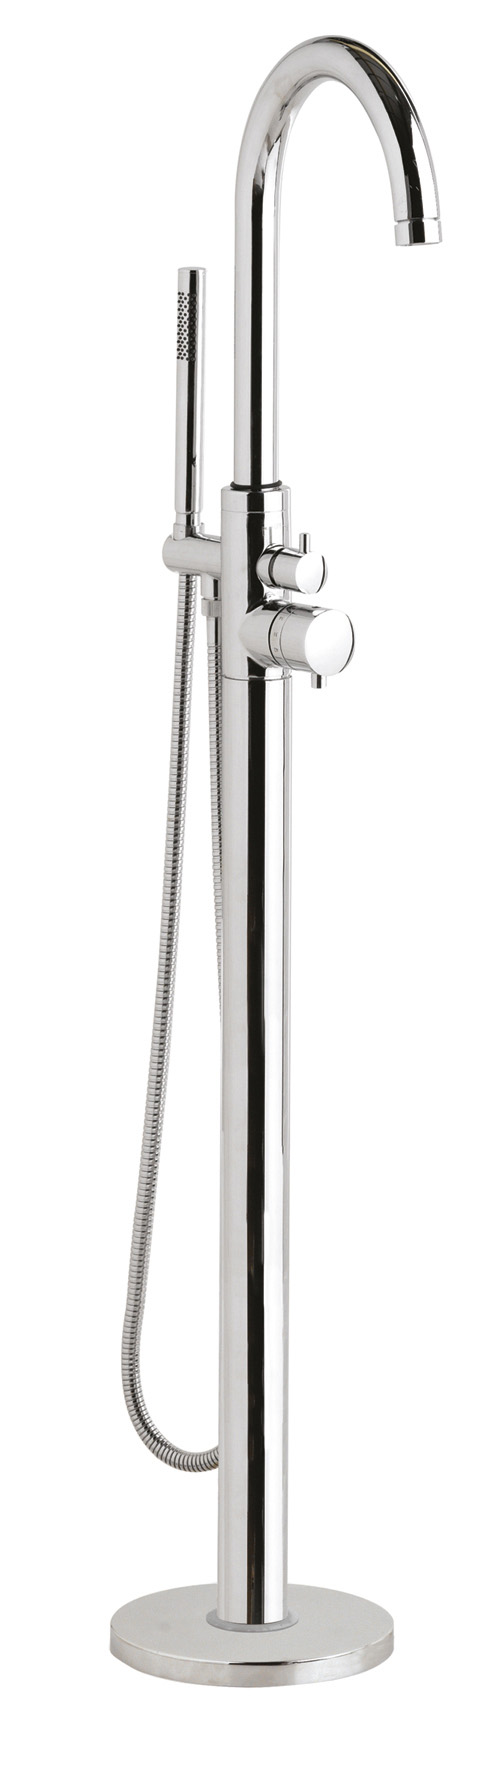 Hudson Reed Thermostatic Floor Standing Bath Shower Mixer (PN322) - 15198